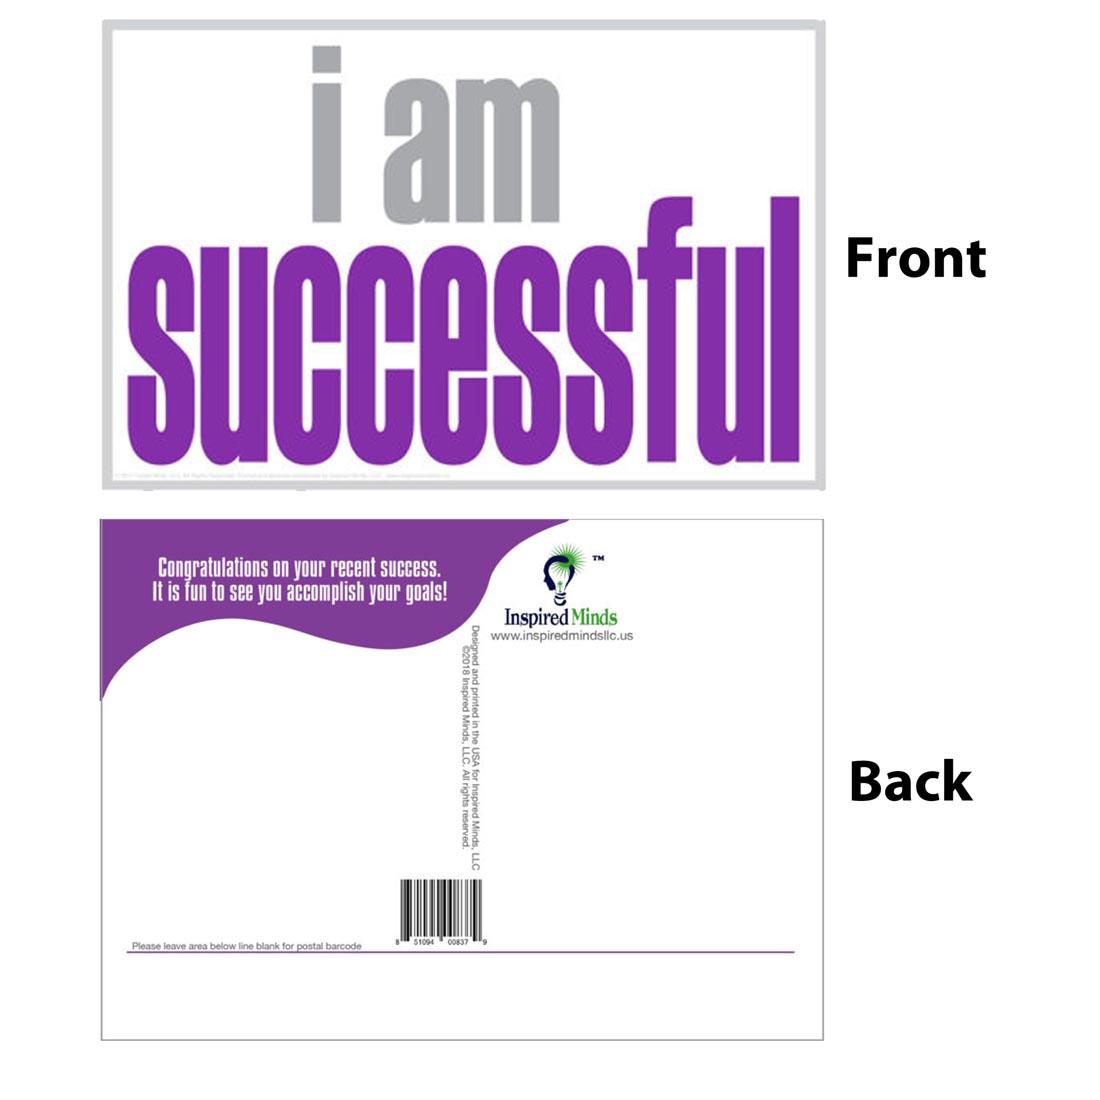 Front and back of the I Am Successful Postcard